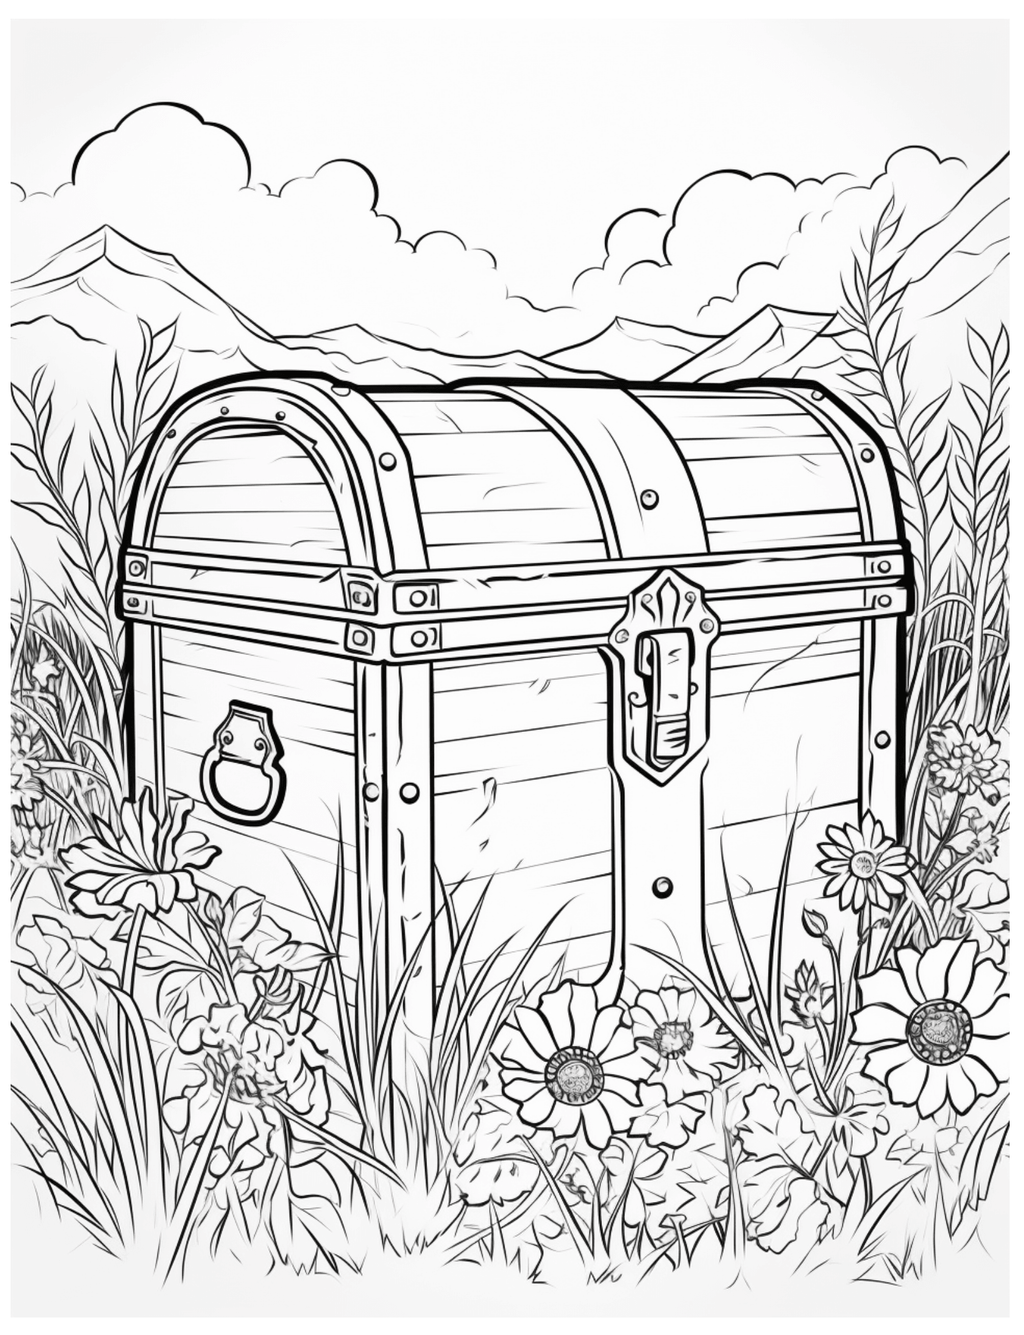 Parable of treasure in a field coloring page coloring page